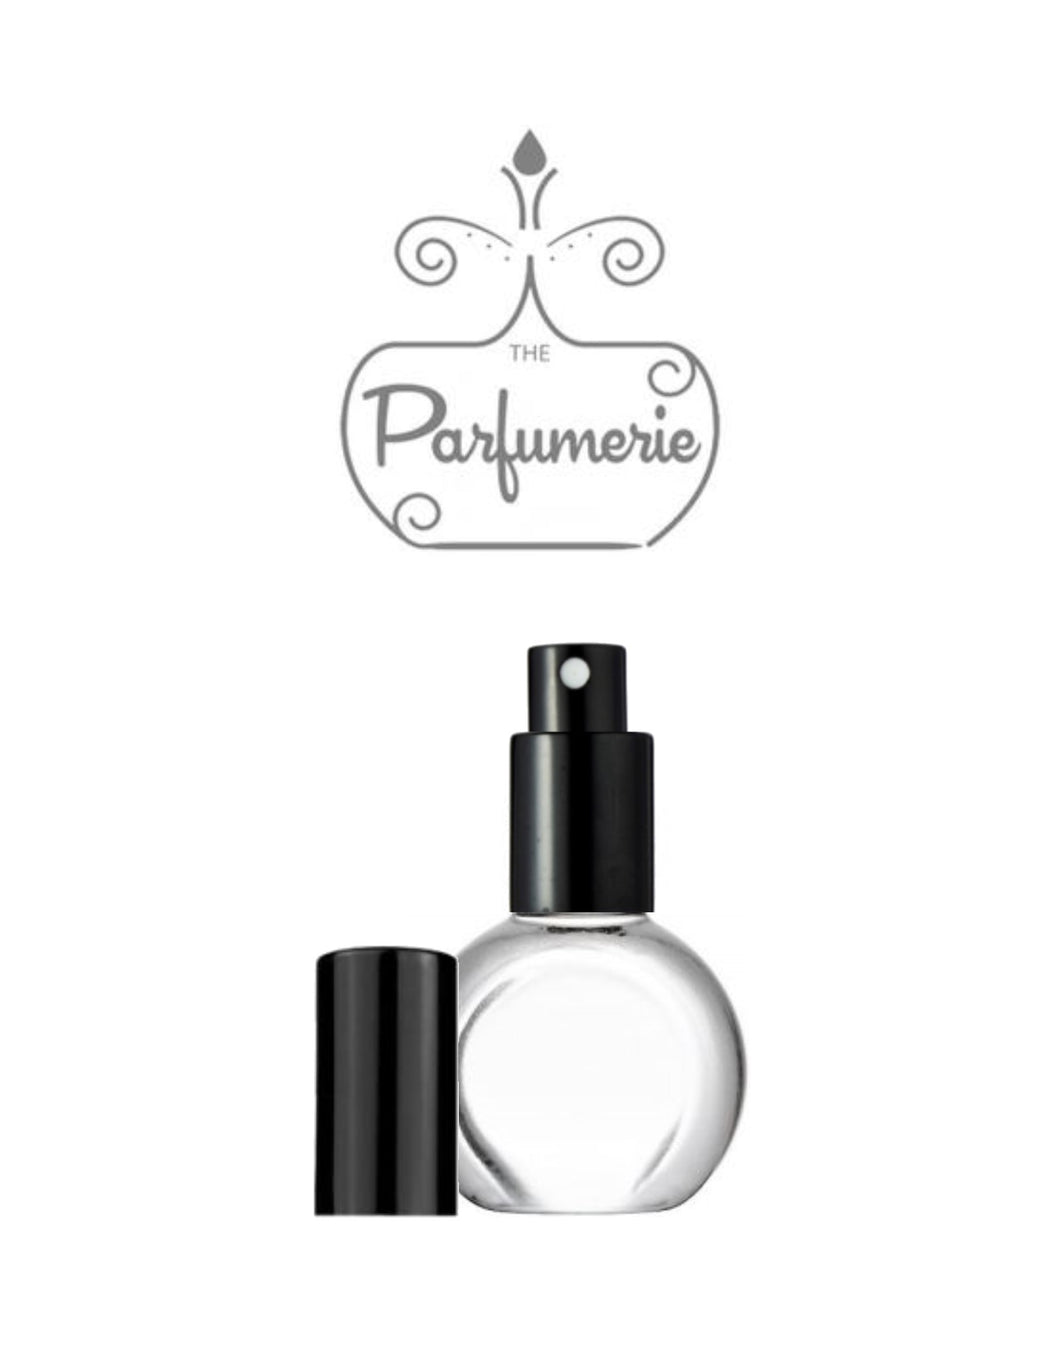 Perfume Bottle. Atomizer Bottle with Sprayer top in Black with matching over cap. These Spray Bottles are perfect for Perfume Oils, Essential Oils, Fragrance Oils and Room Sprays.